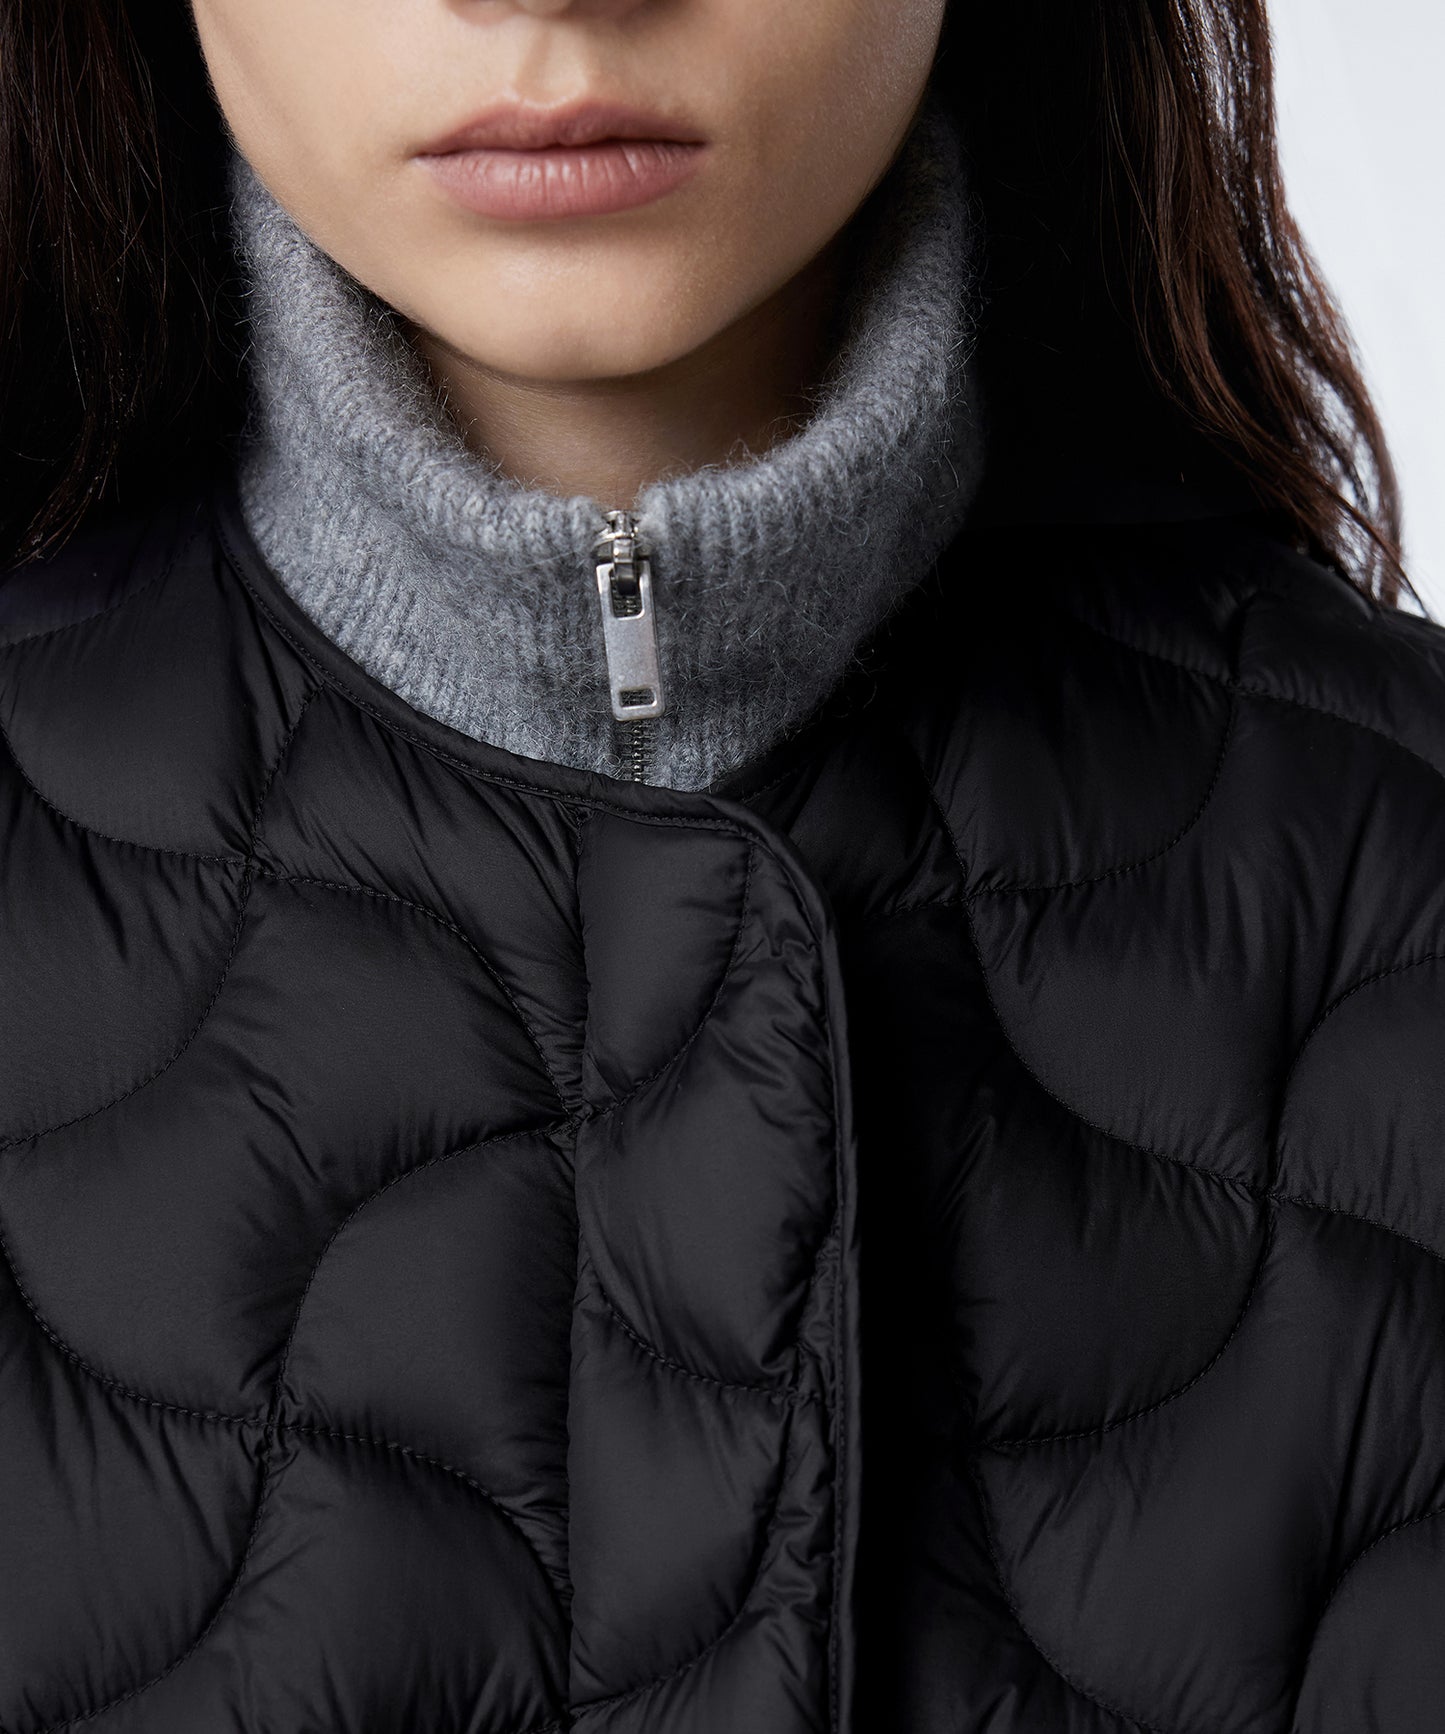 Wavy Diamond-quilted Reversible Jacket